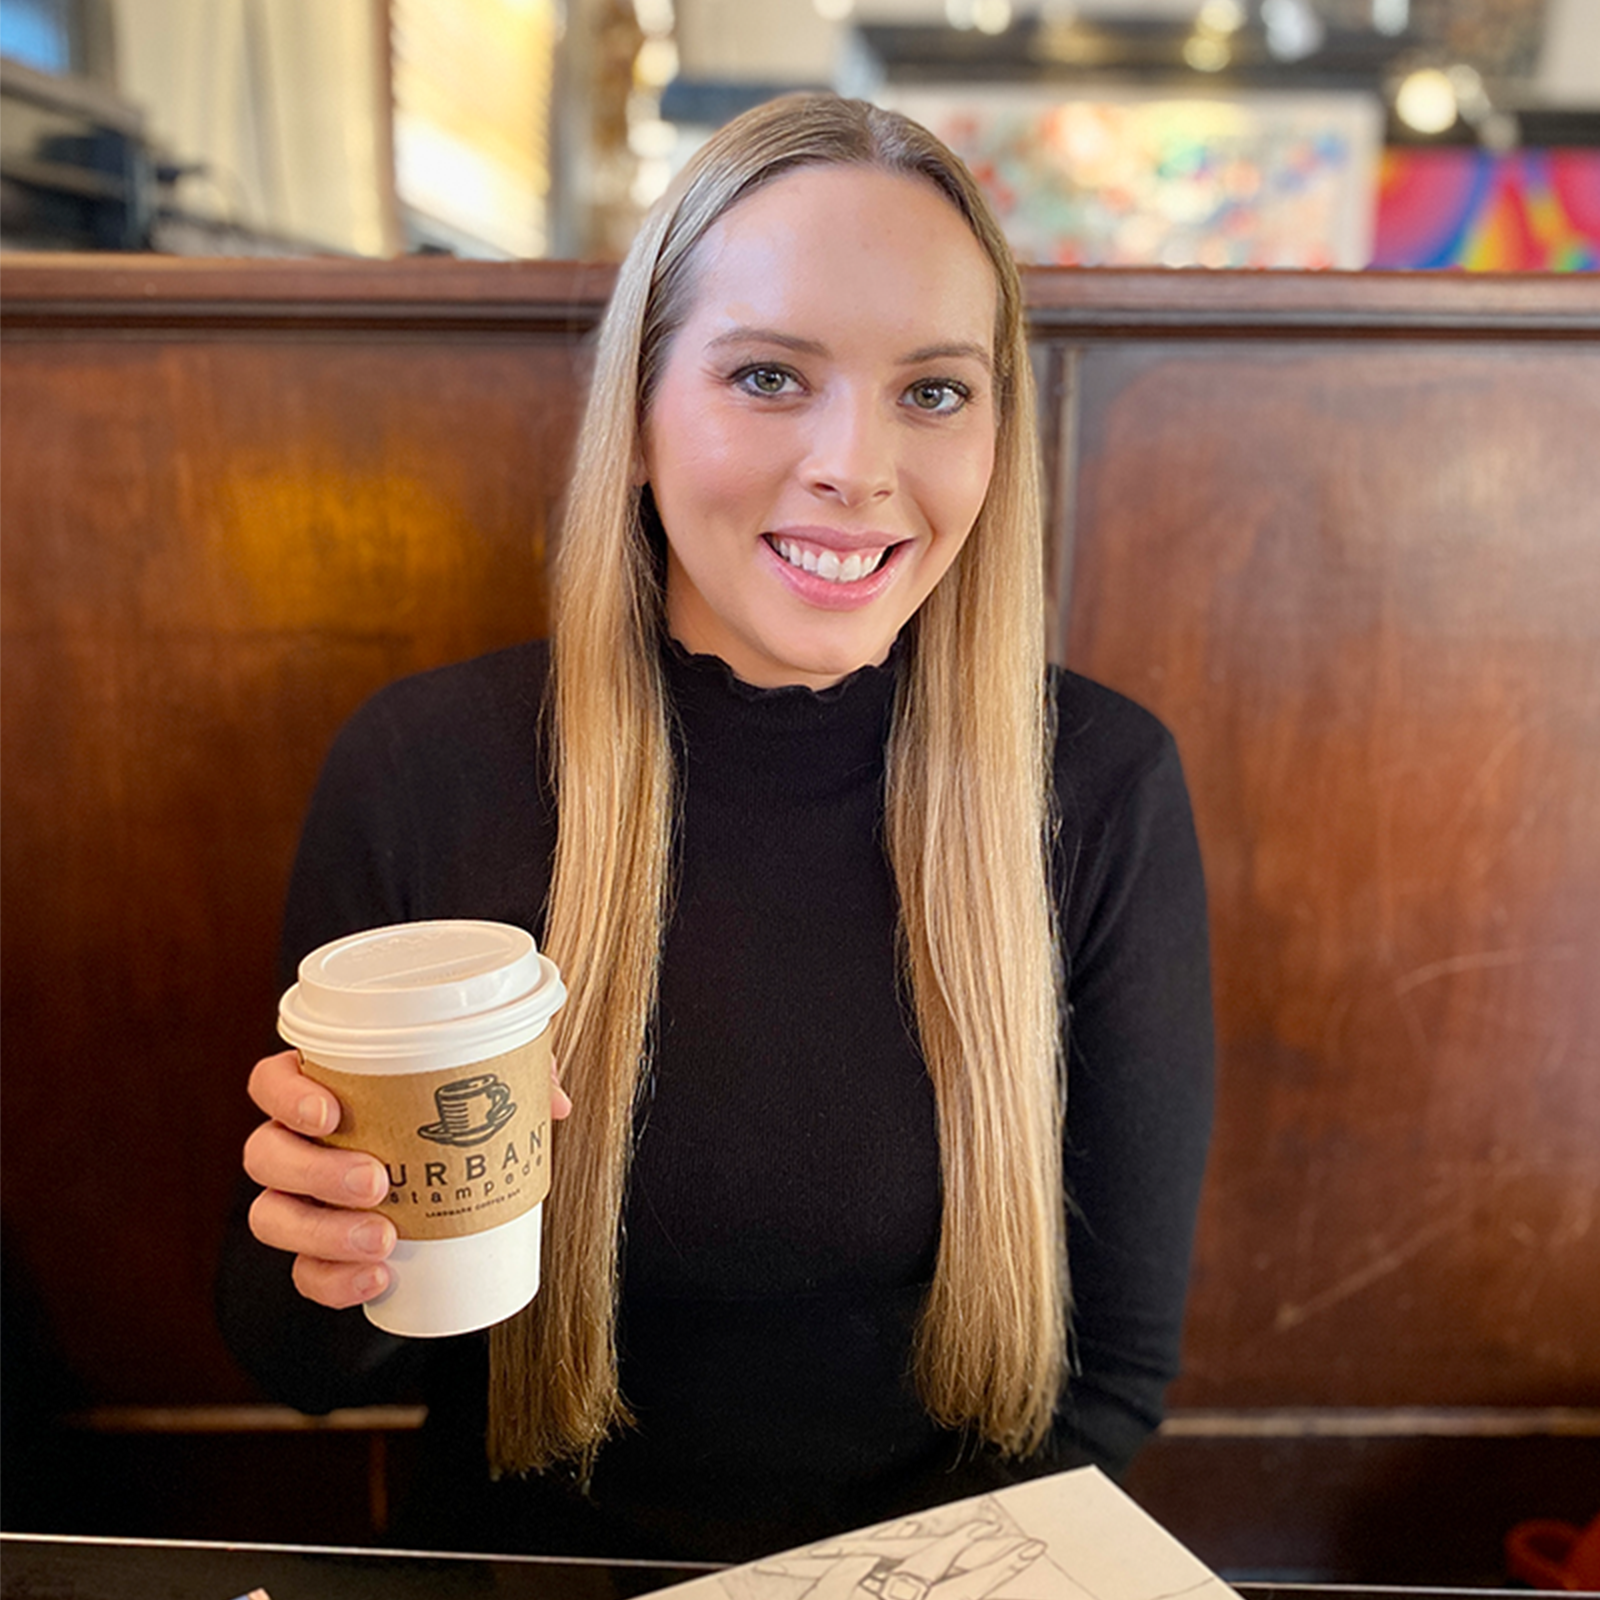 Woman in a booth at a coffee shop, holding a warm beverage and smiling for a photo.